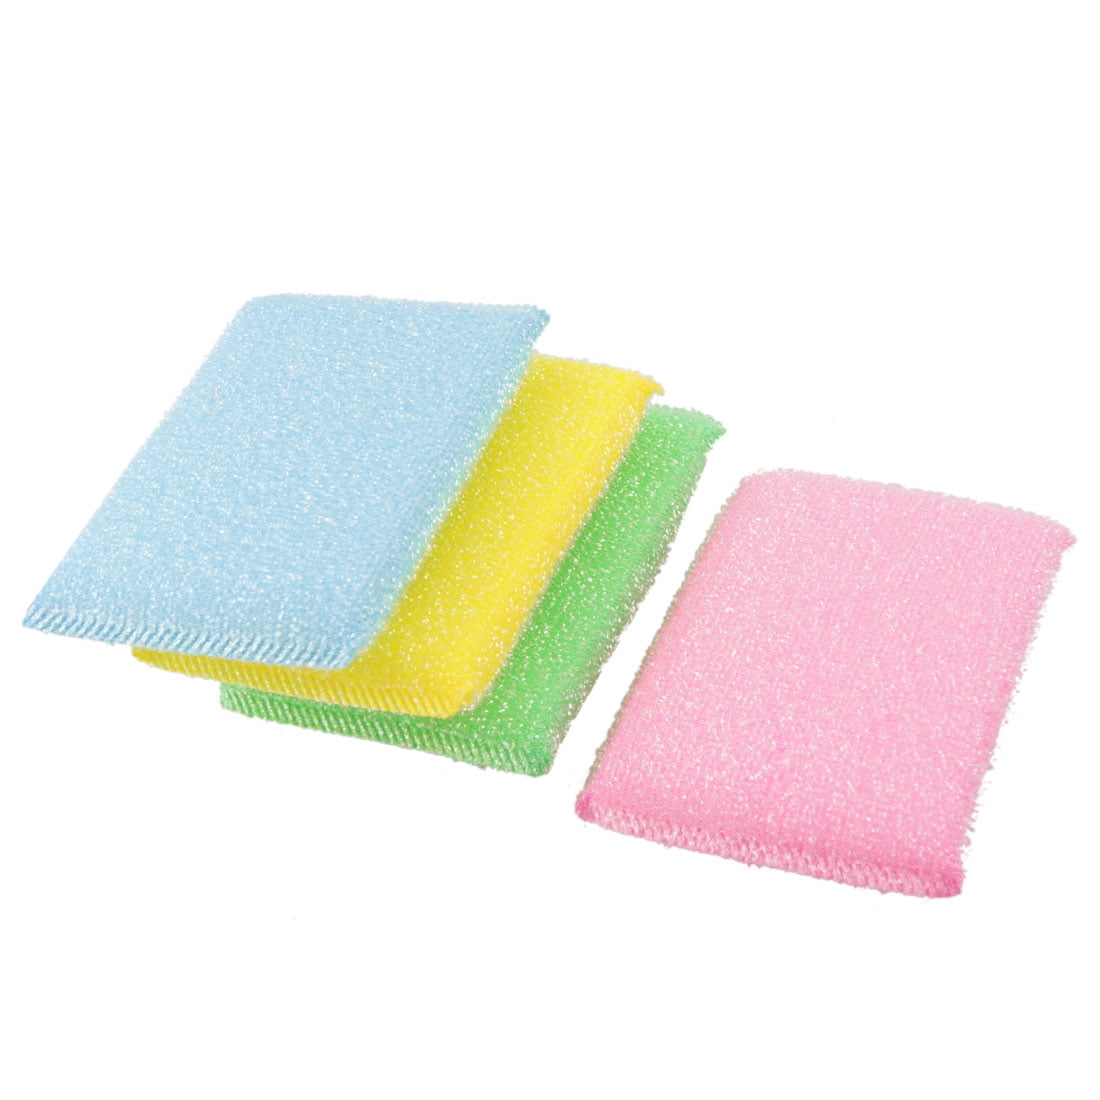 Superbright Sponge Scourers 1x packs of 10 Kitchen Cleaning Washing Dishes 